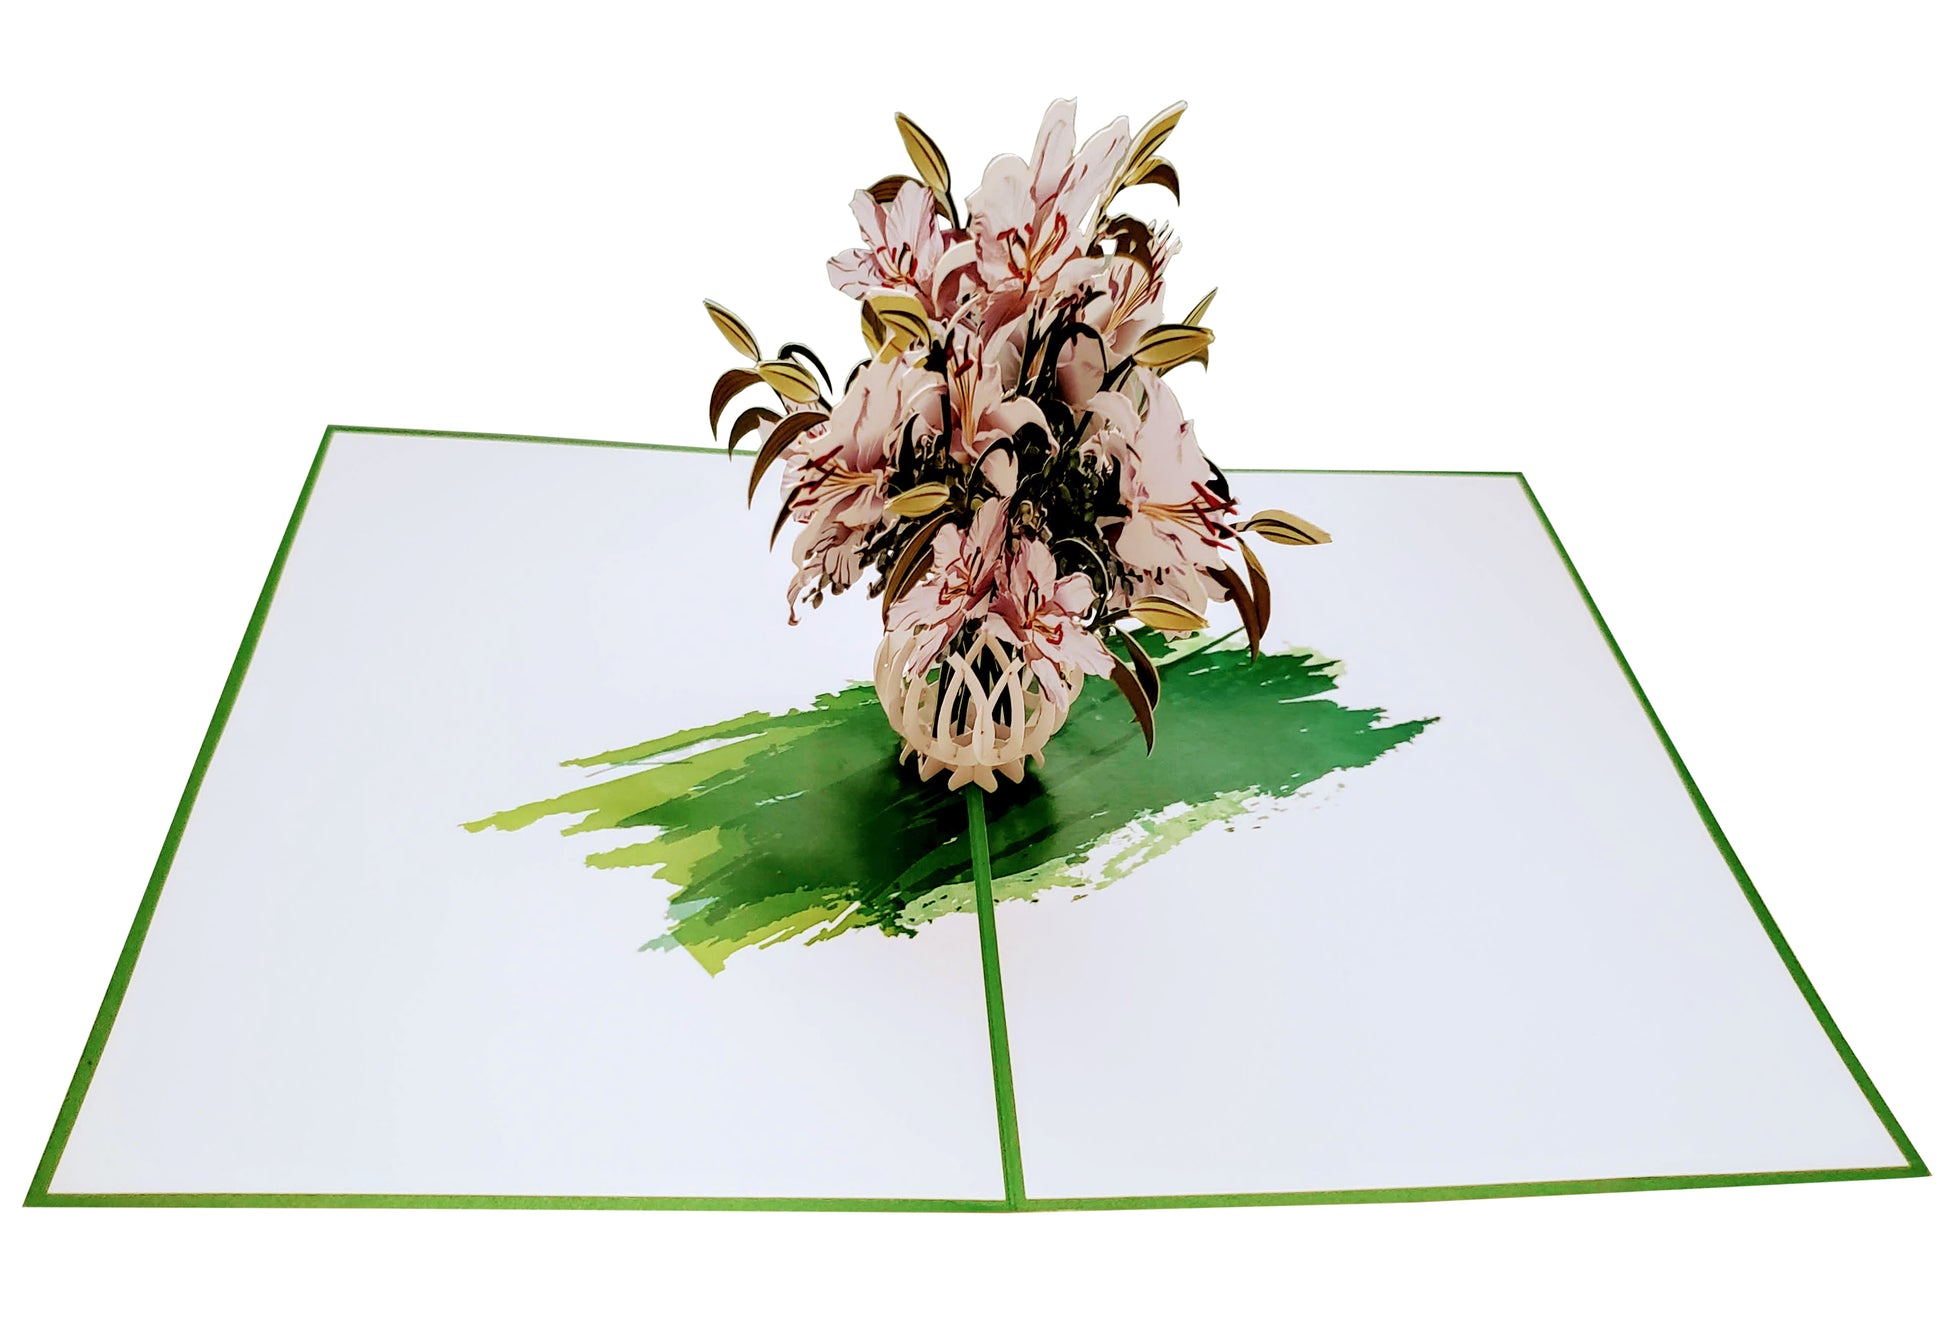 Lilies & Lupines Pop Up 3D Greeting Card